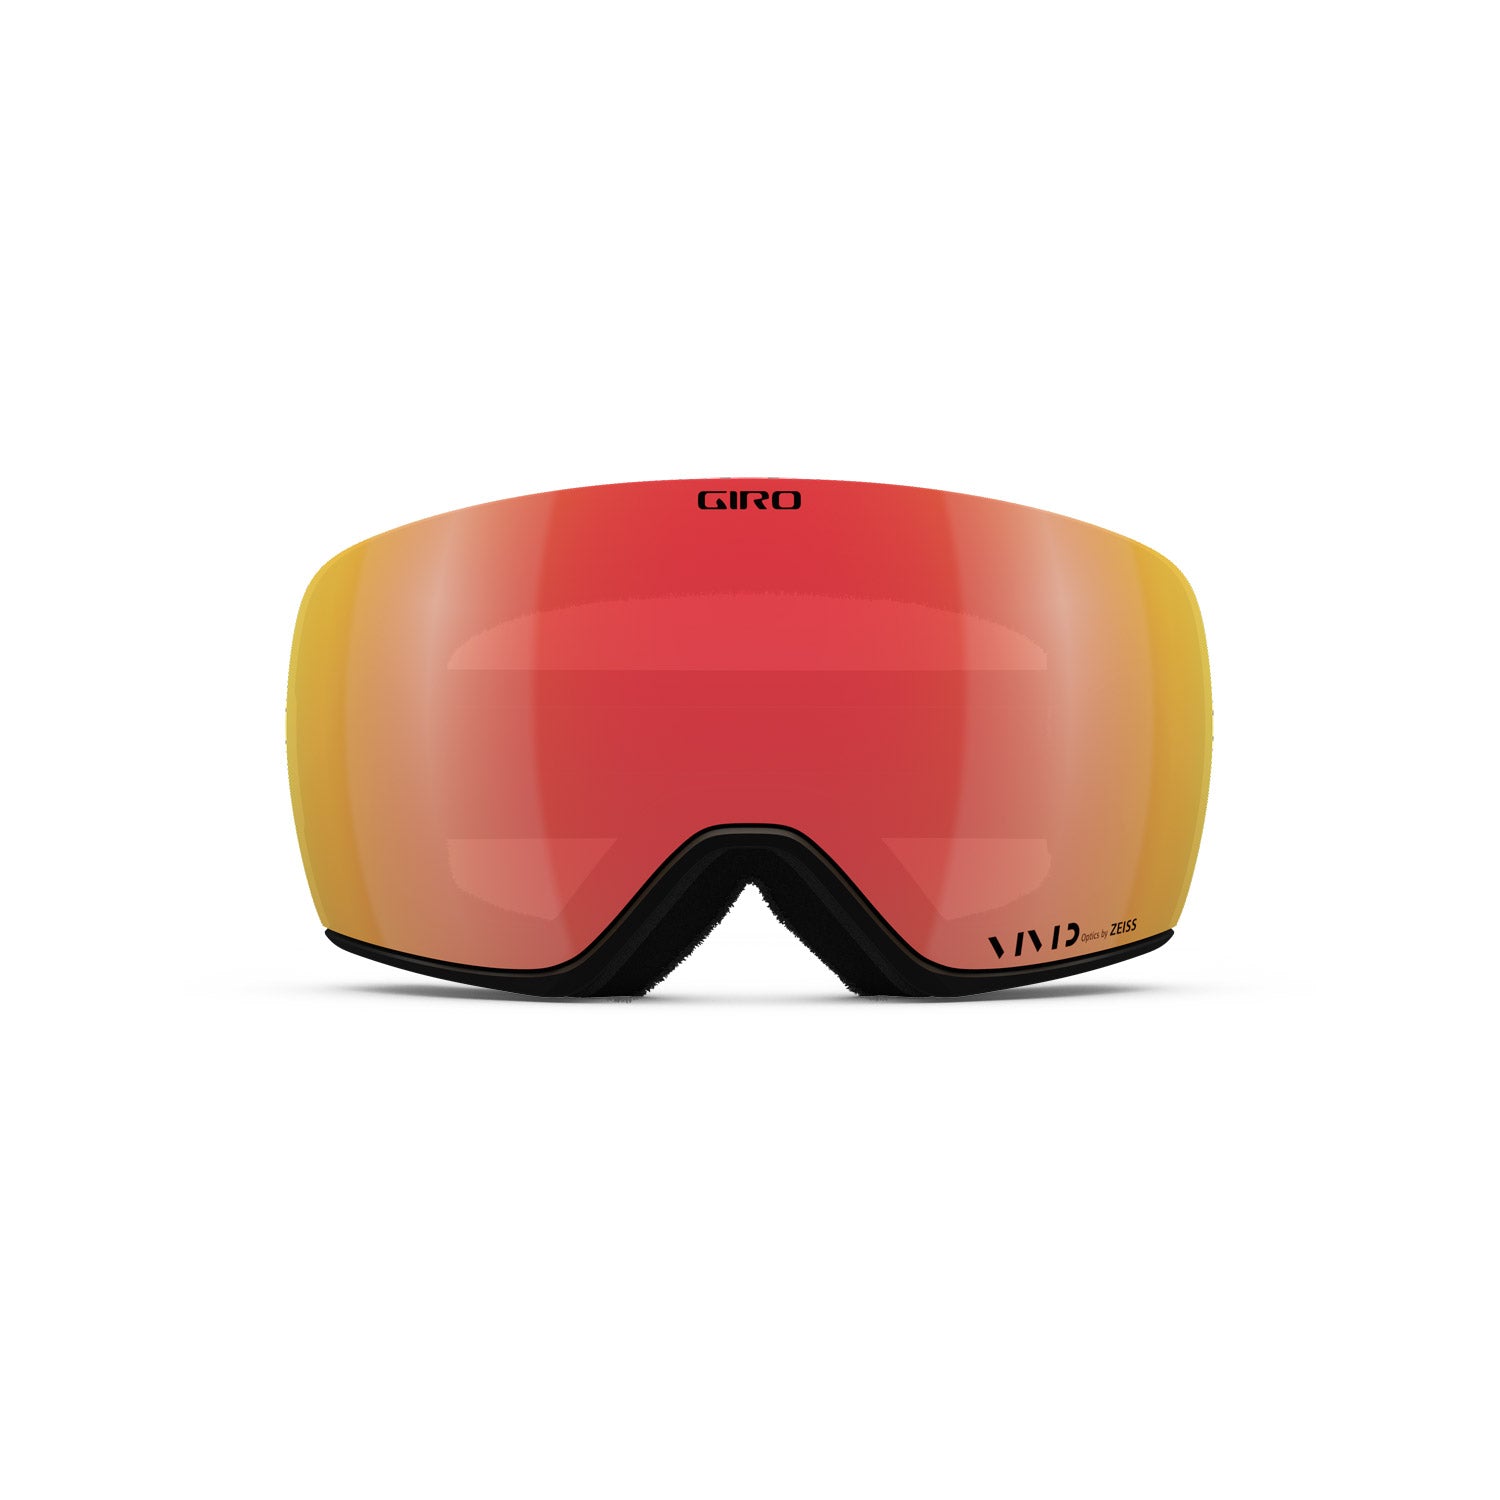 Article II Asian Fit Snow Goggle